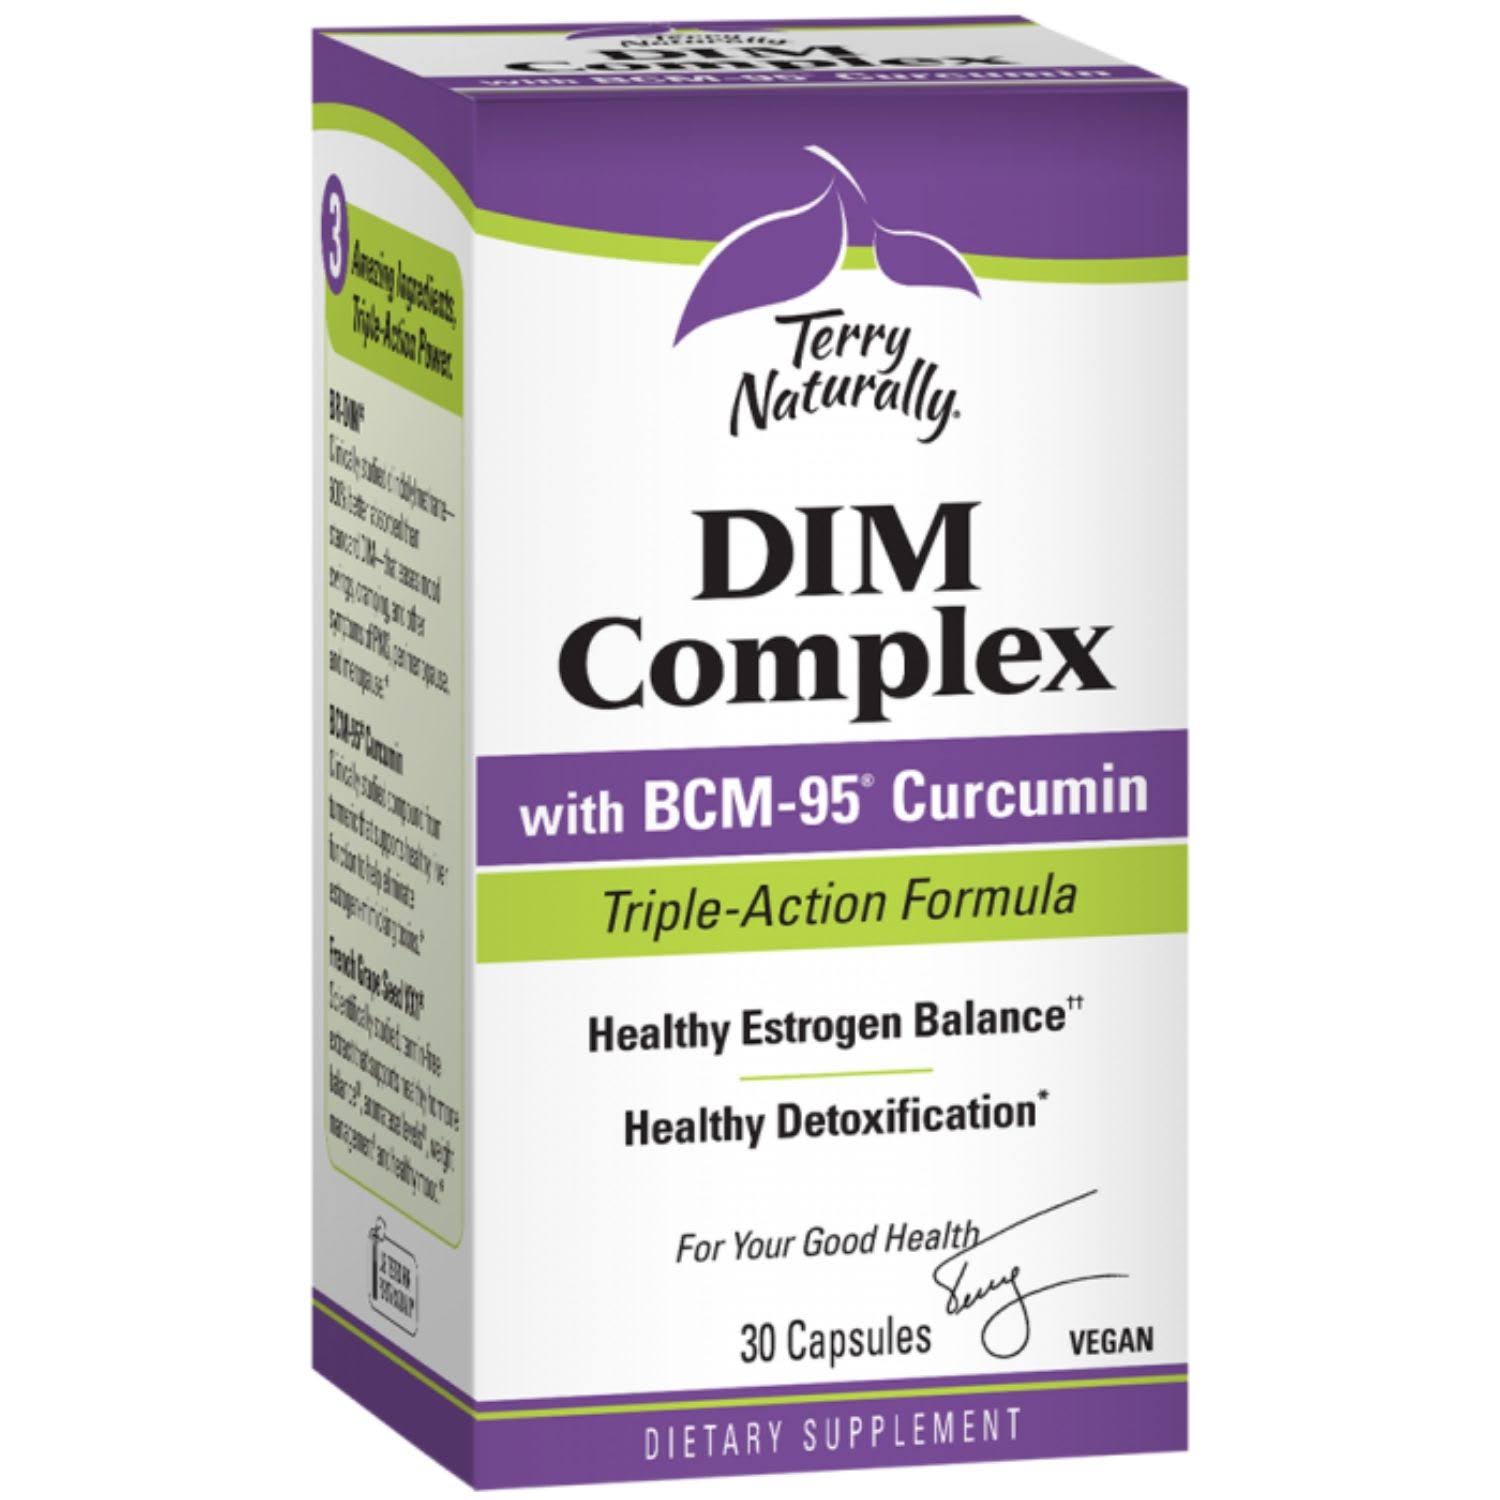 Terry Naturally Dim Complex with BCM-95 Curcumin 30 Capsules